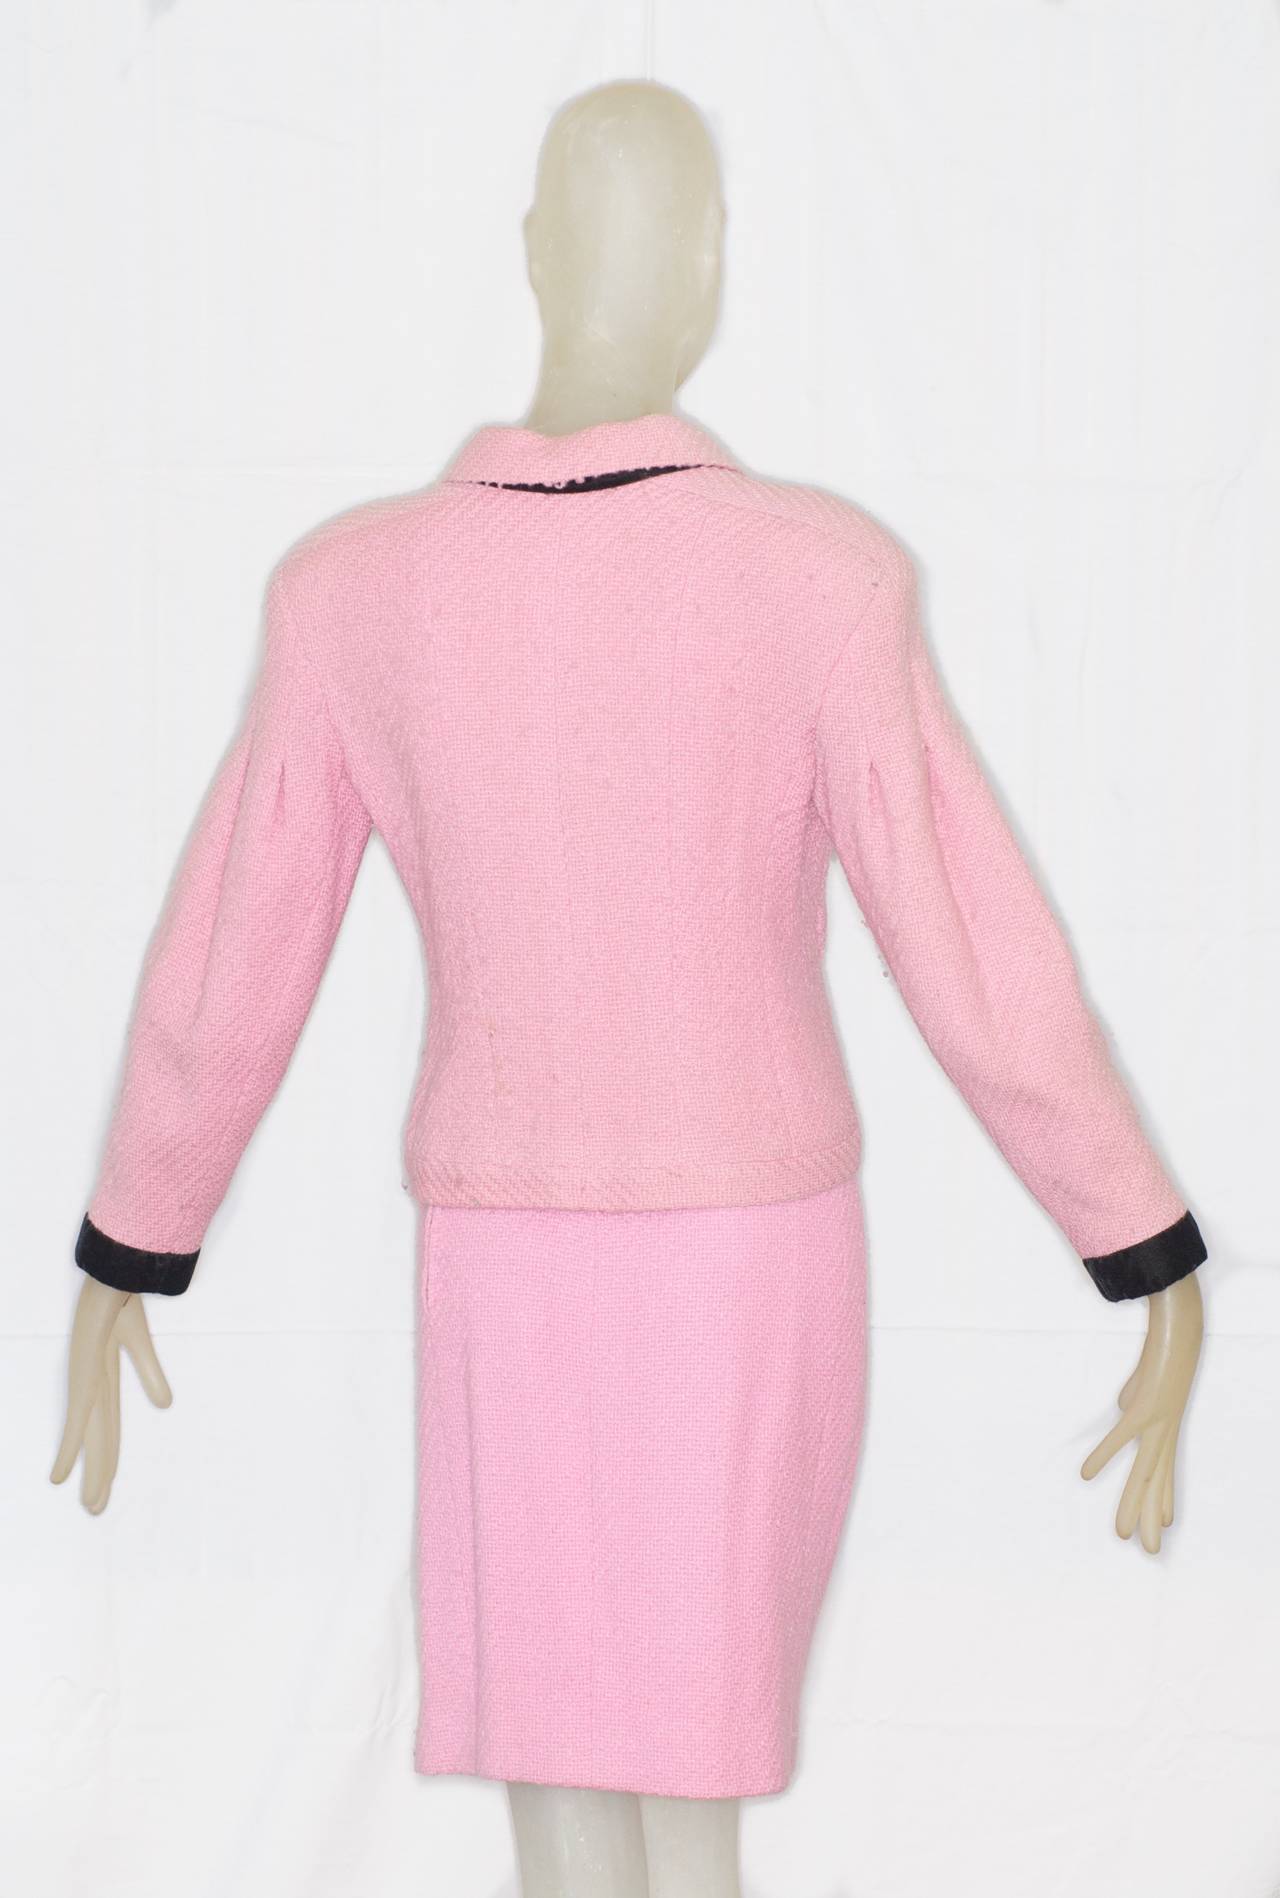 Women's Chanel Haute Couture Pink Jacket and Skirt For Sale